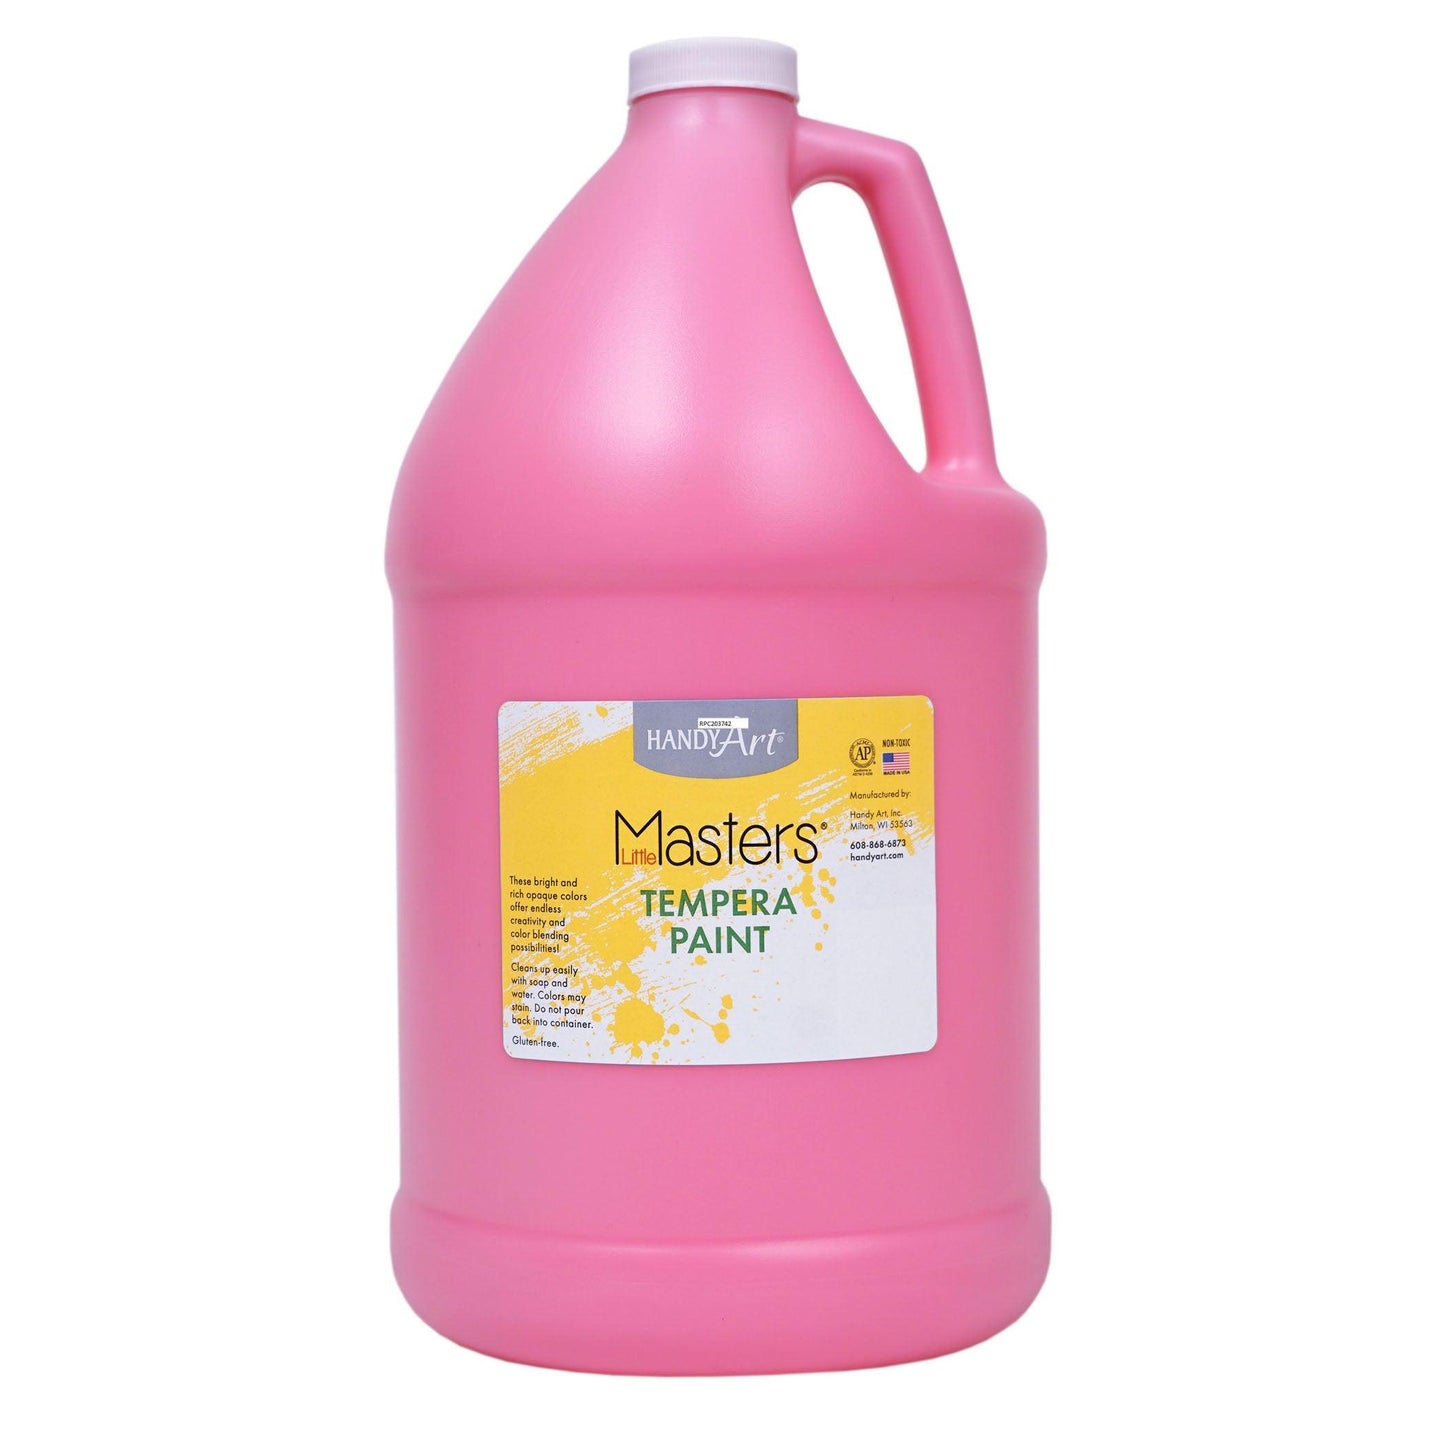 Little Masters® Tempera Paint, Pink, Gallon, Pack of 2 - Loomini